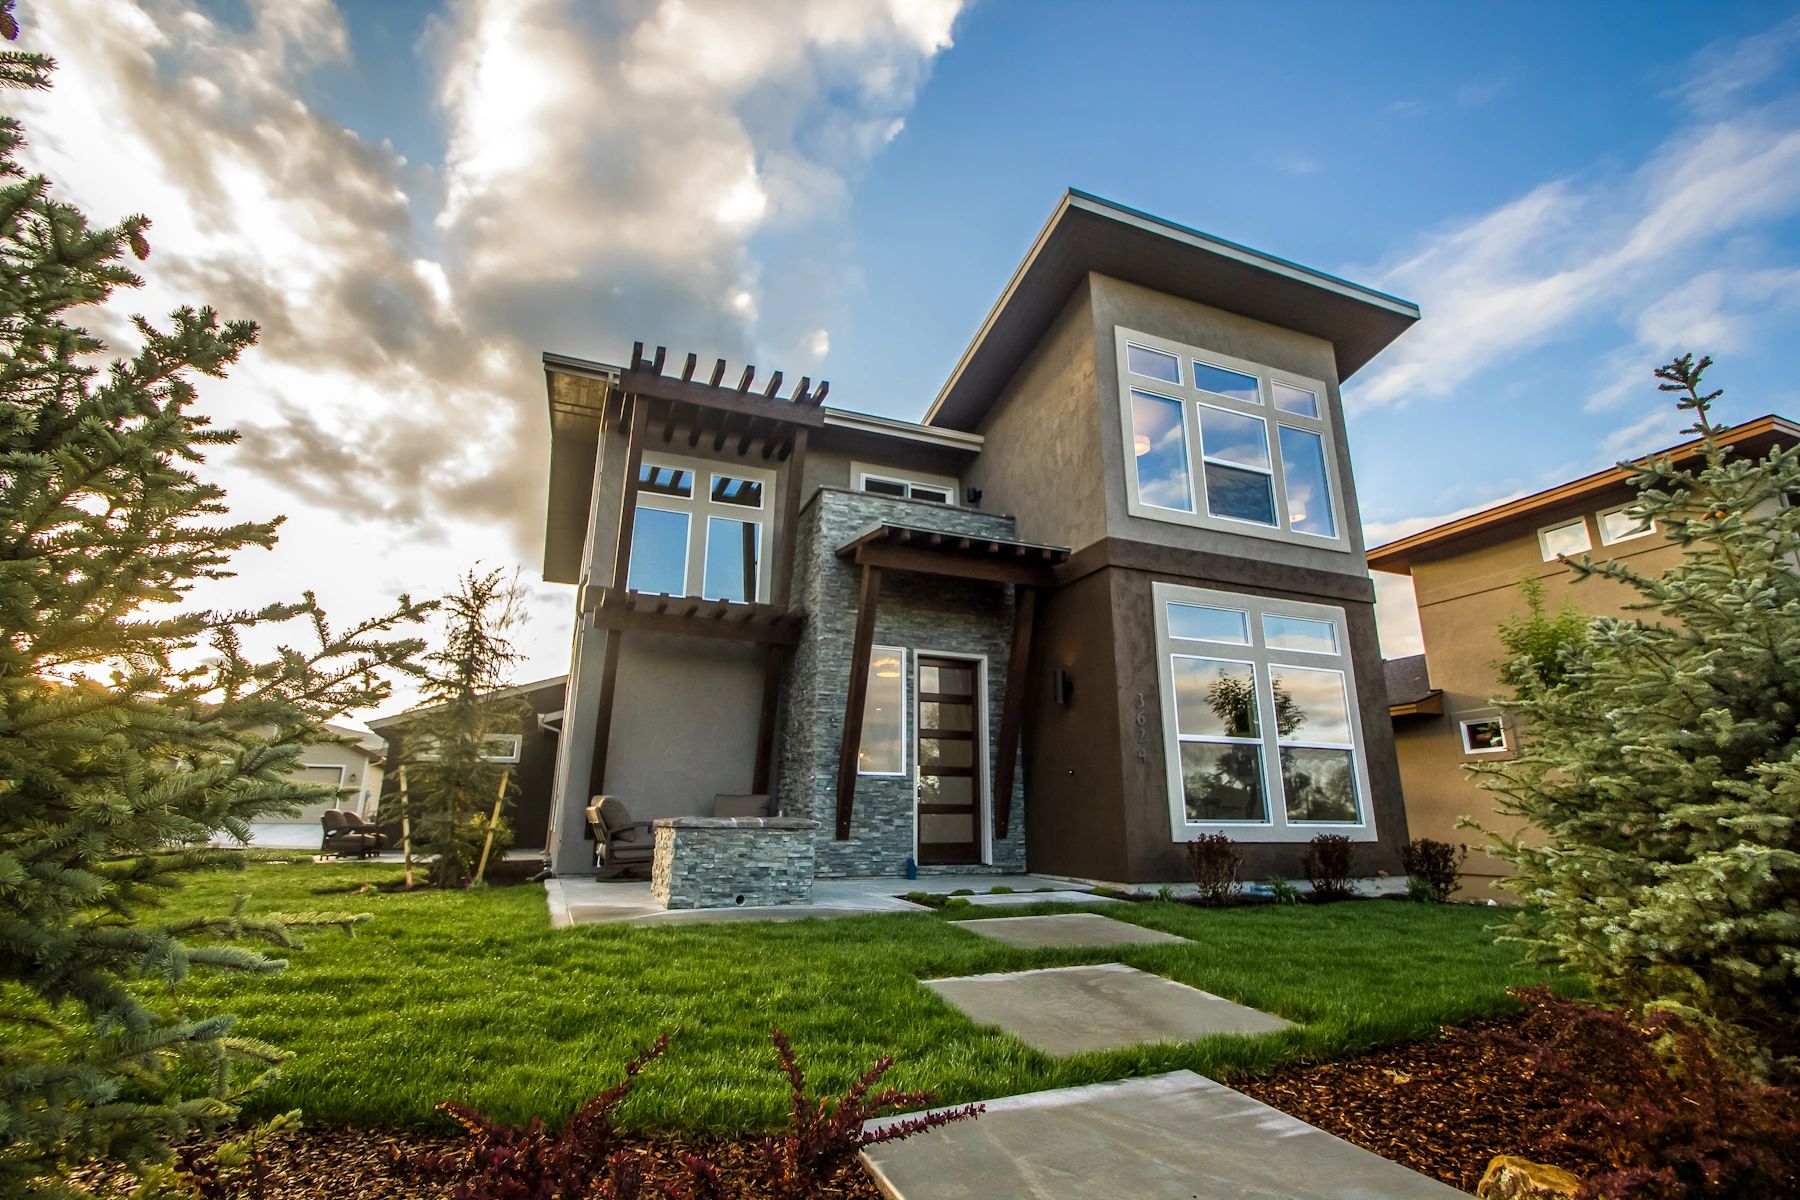 1st place Best Exterior; 2012 Parade of Homes - Boise, ID